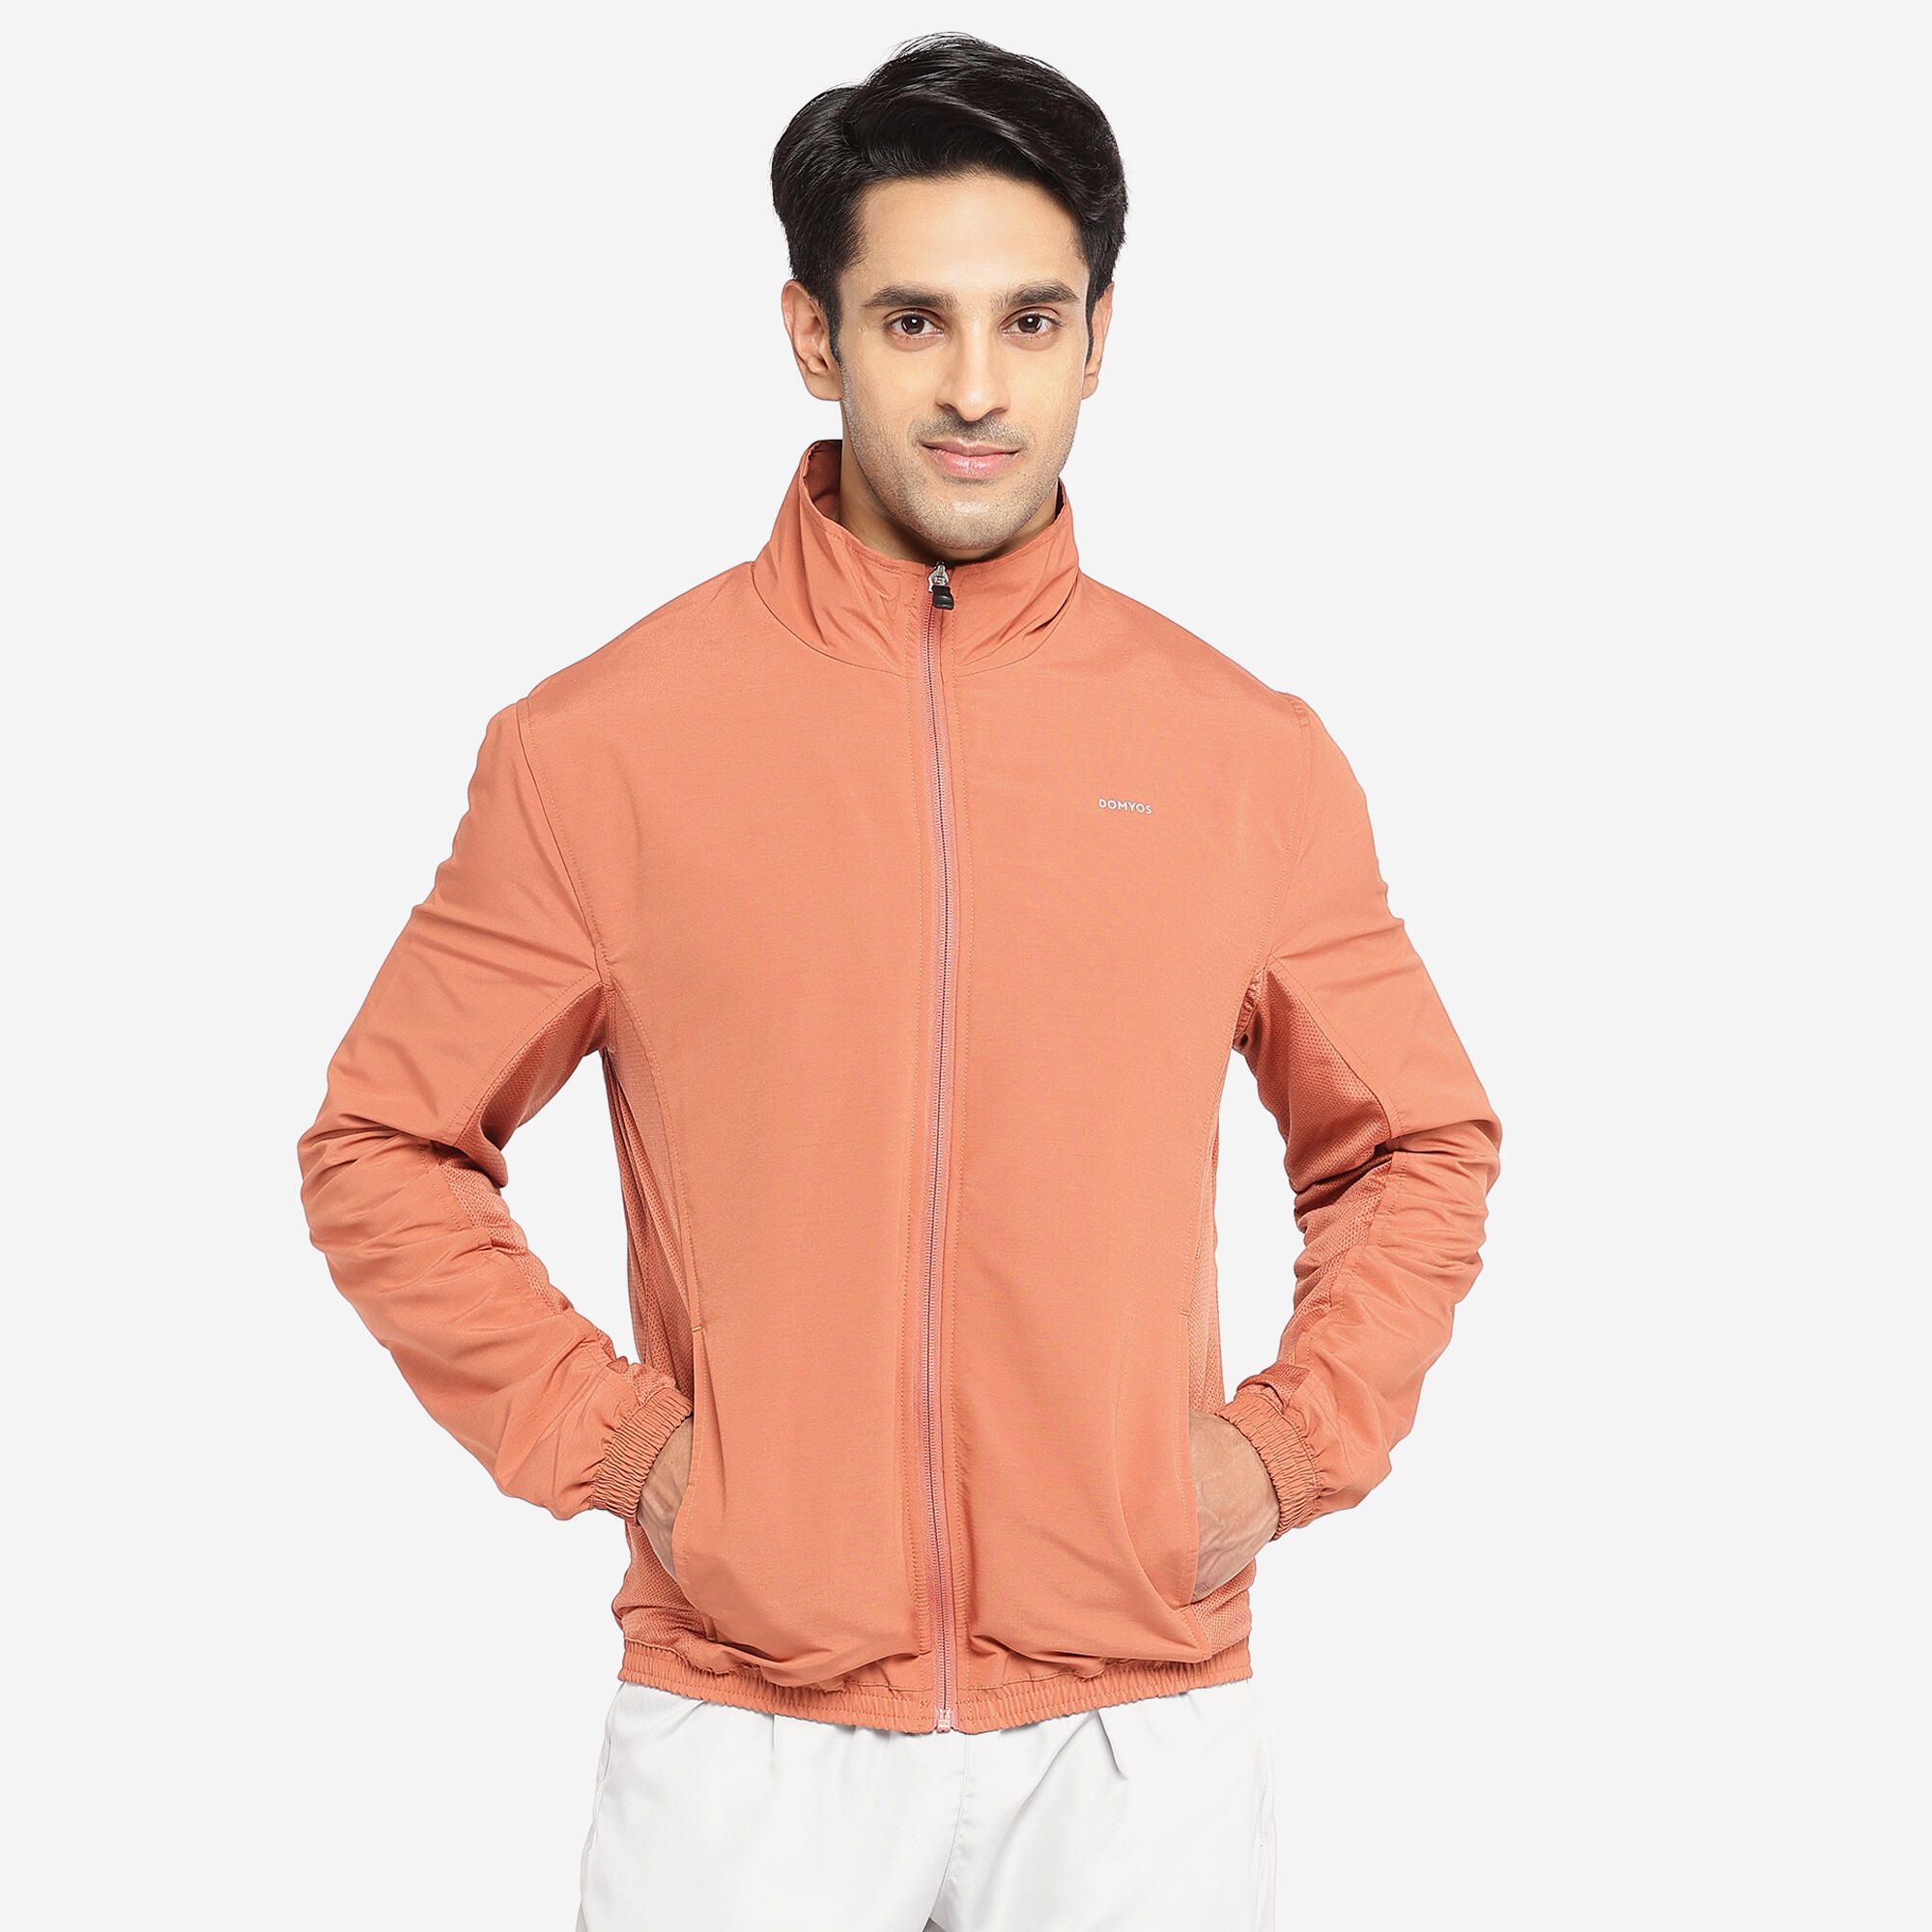 Forclaz by Decathlon Full Sleeve Solid Men Jacket - Price History